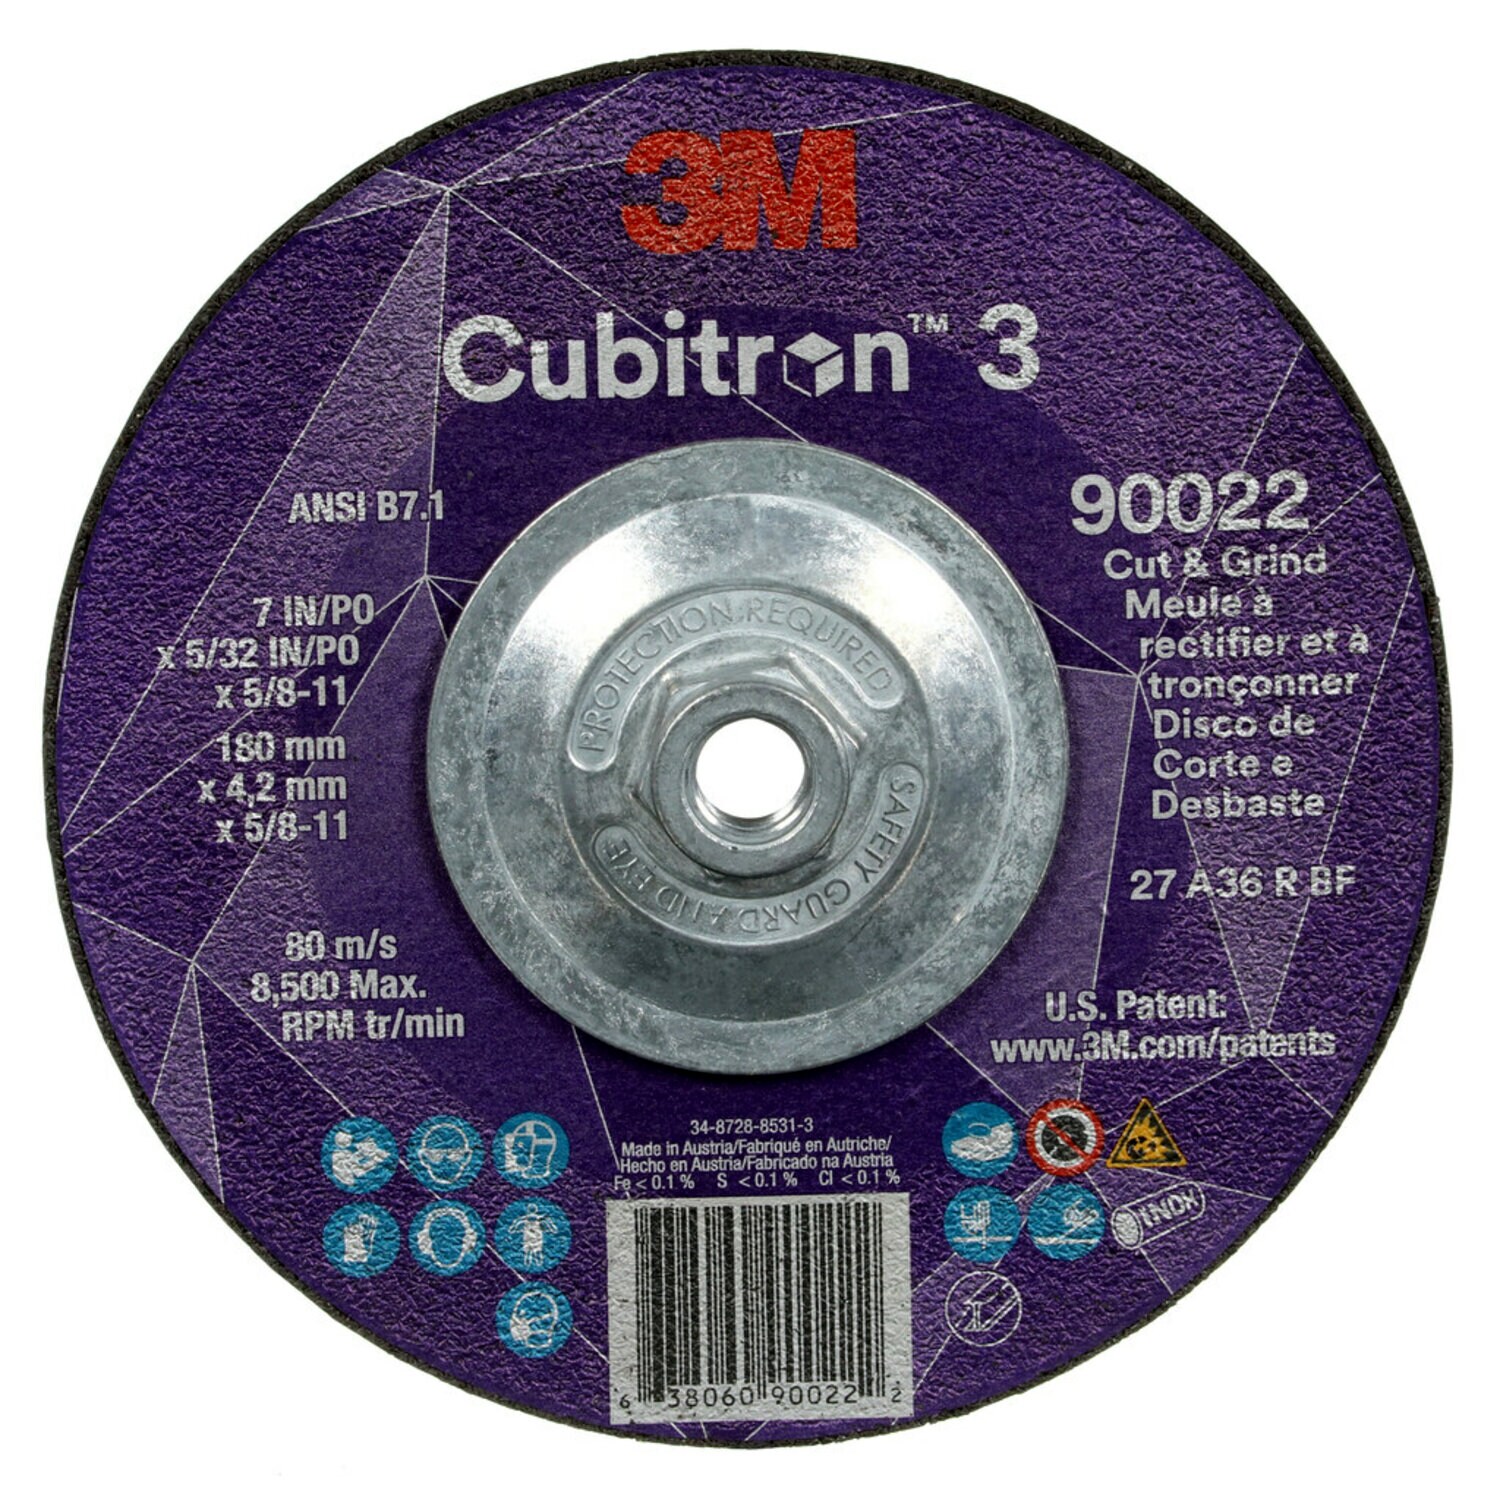 7100313551 - 3M Cubitron 3 Cut and Grind Wheel, 90022, 36+, T27, 7 in x 5/32 in x
5/8 in-11 (180 x 4.2 mm x 5/8-11 in), ANSI, 10 ea/Case